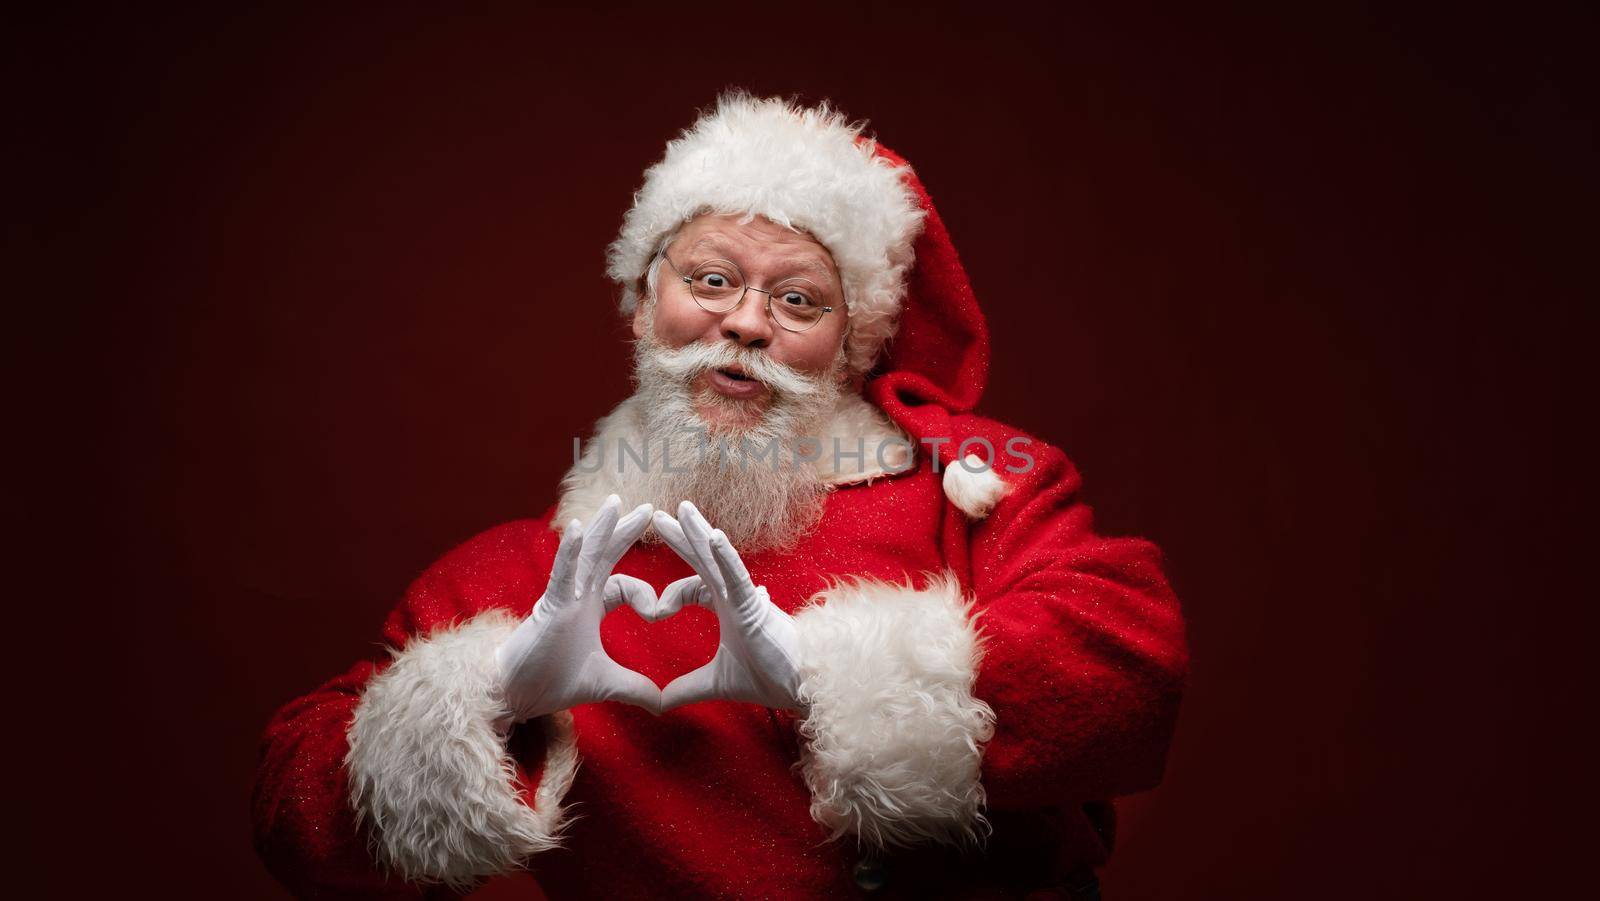 Santa Claus with heart sign by ALotOfPeople